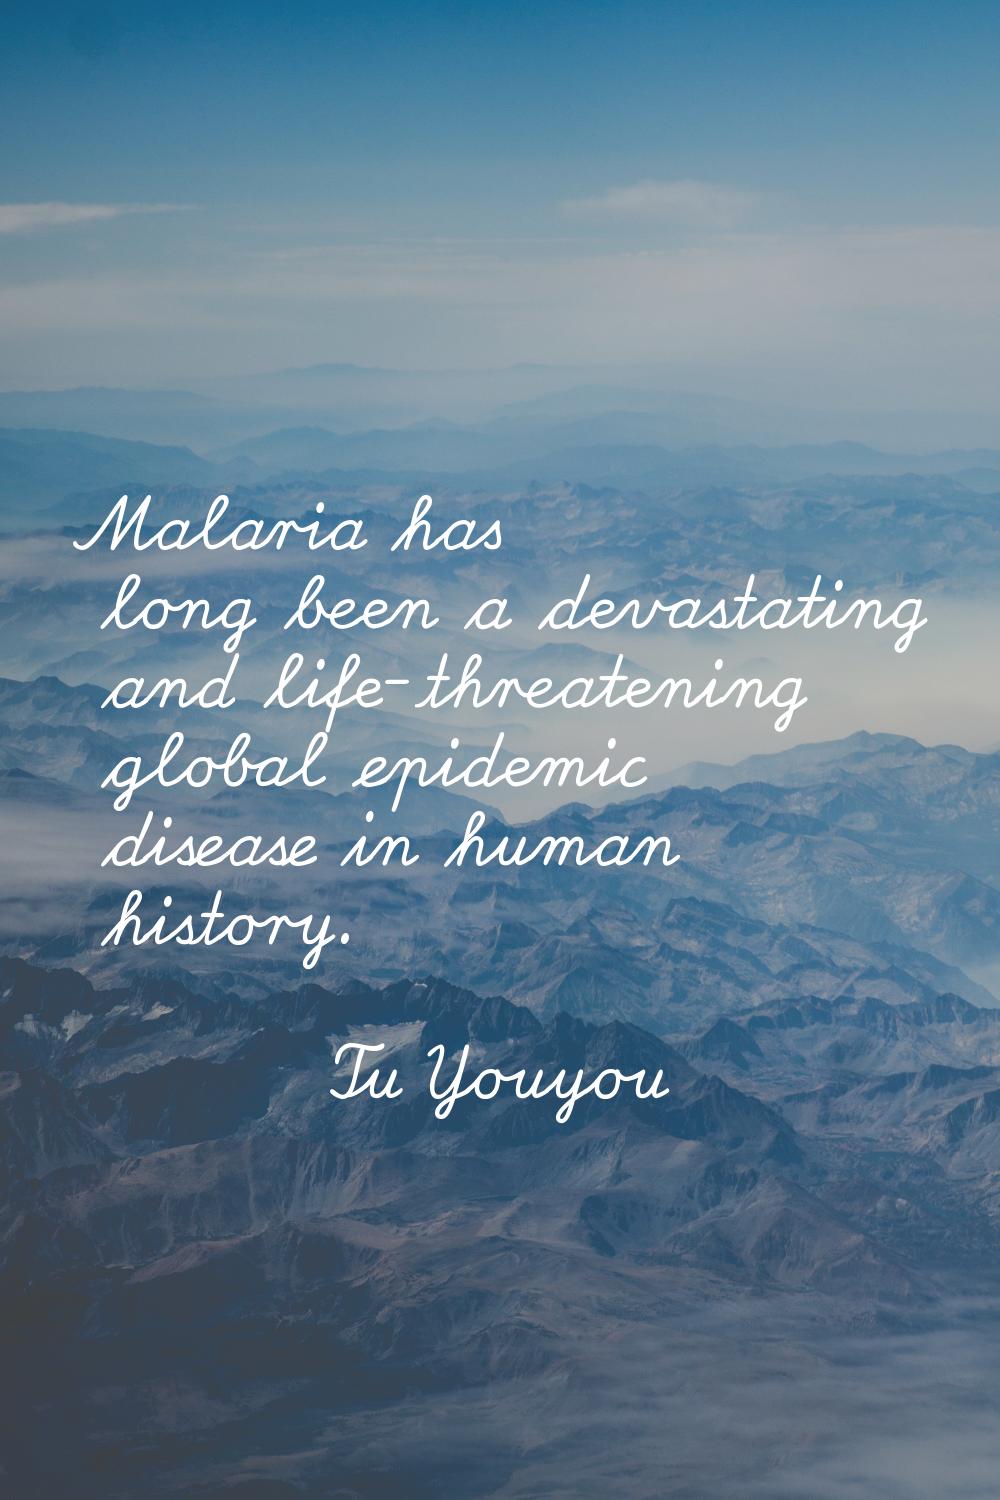 Malaria has long been a devastating and life-threatening global epidemic disease in human history.